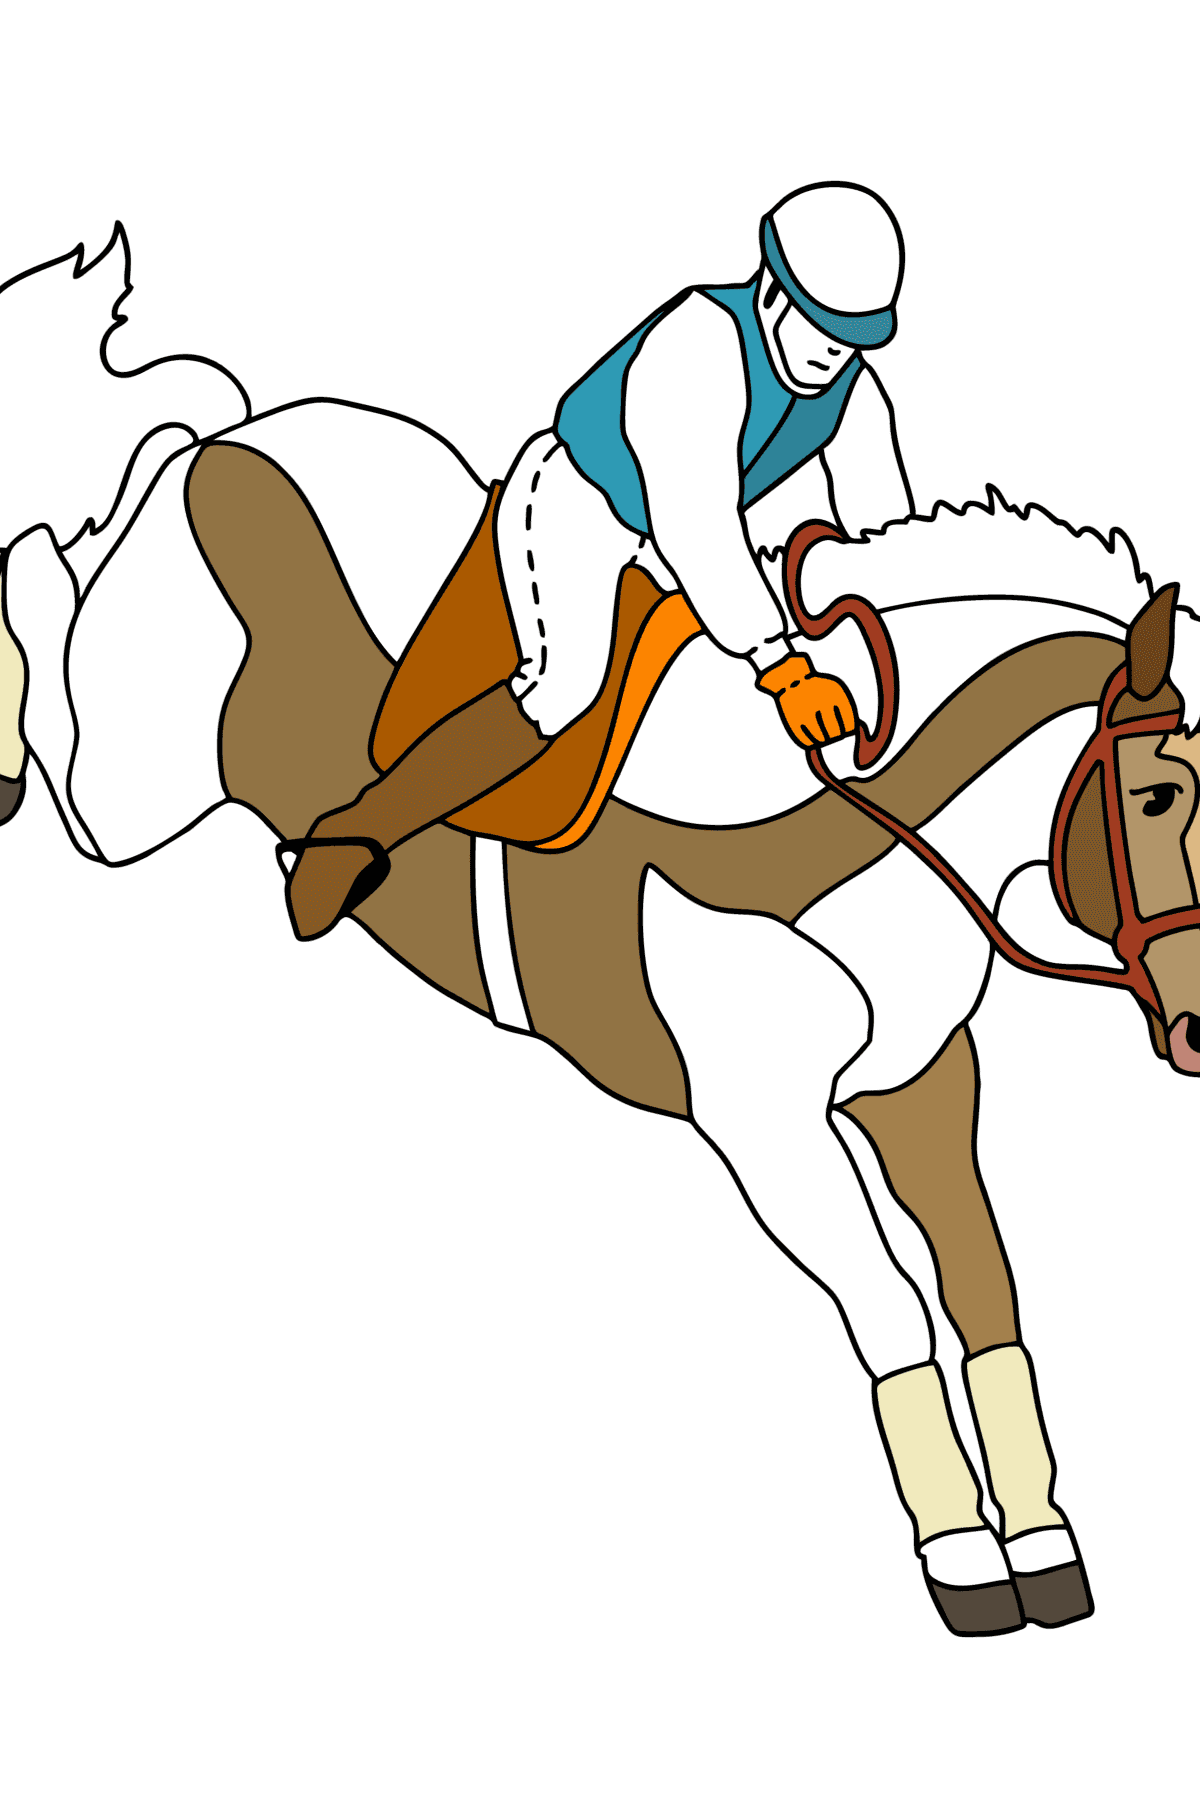 Horseback riding сoloring page - Coloring Pages for Kids